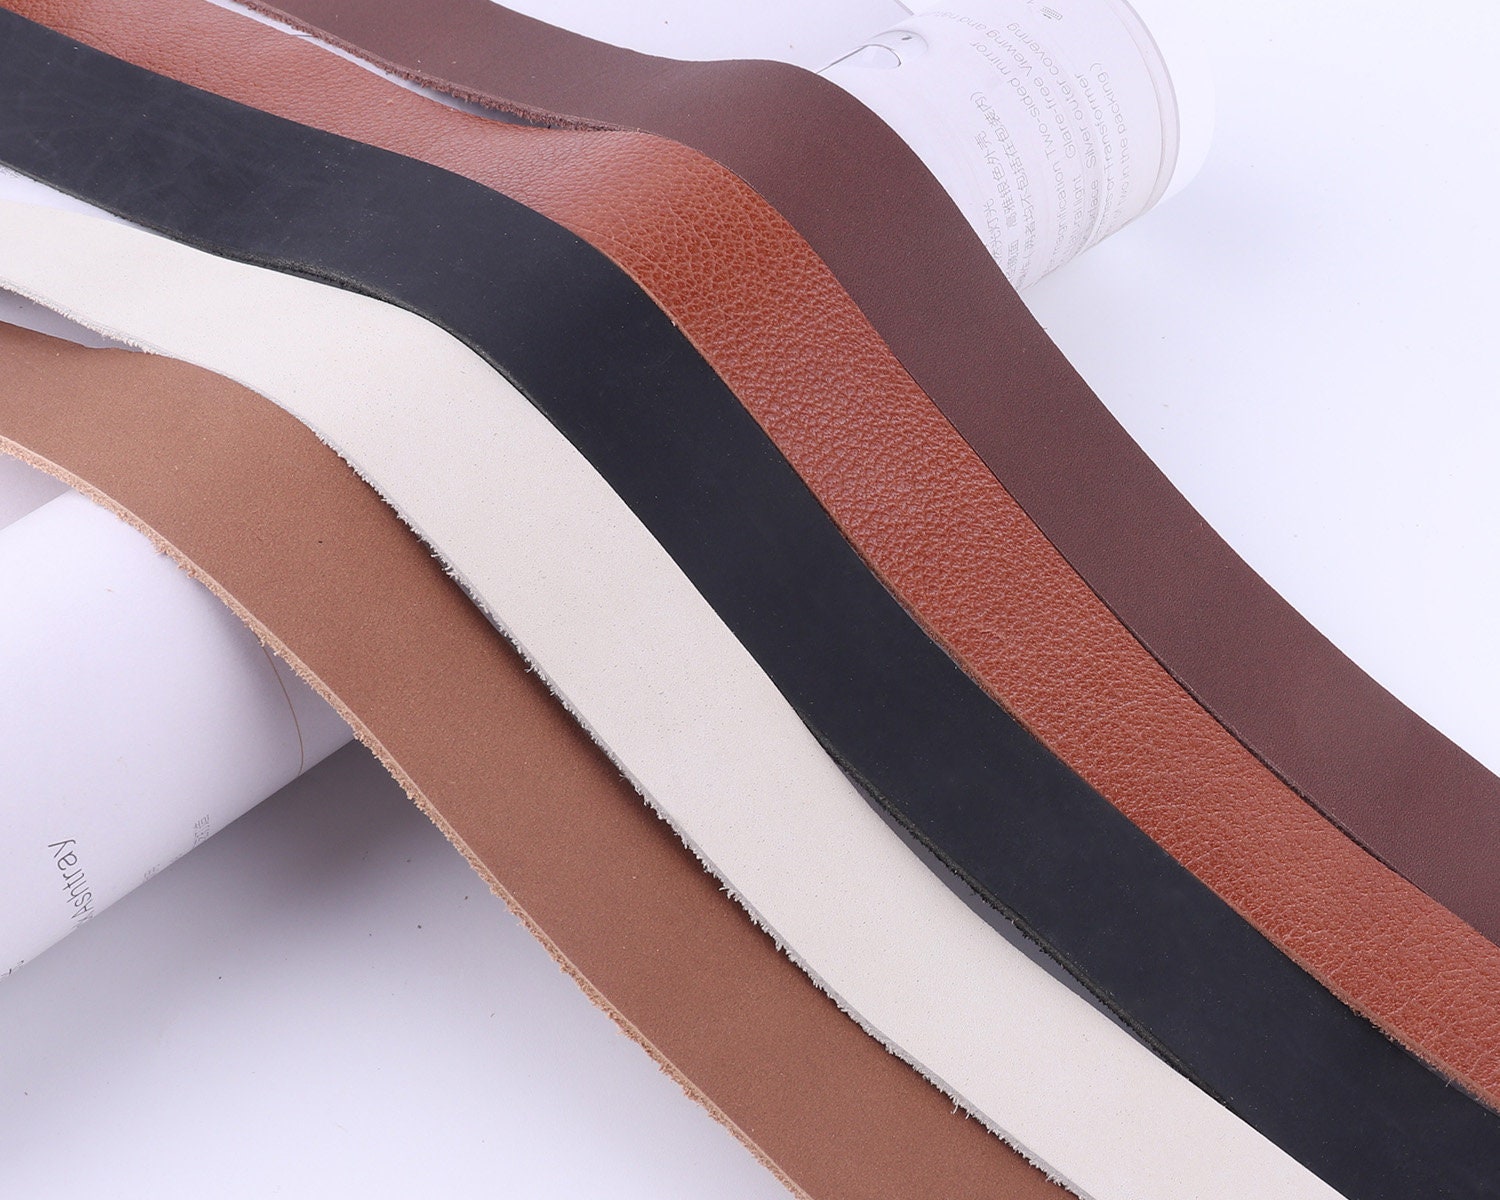 1 1/4leather Strap,long Leather Strip,belt Diy,purse Straps,black  Strips,cowhide Leather,genuine Leather,italian Leather,raw Material 